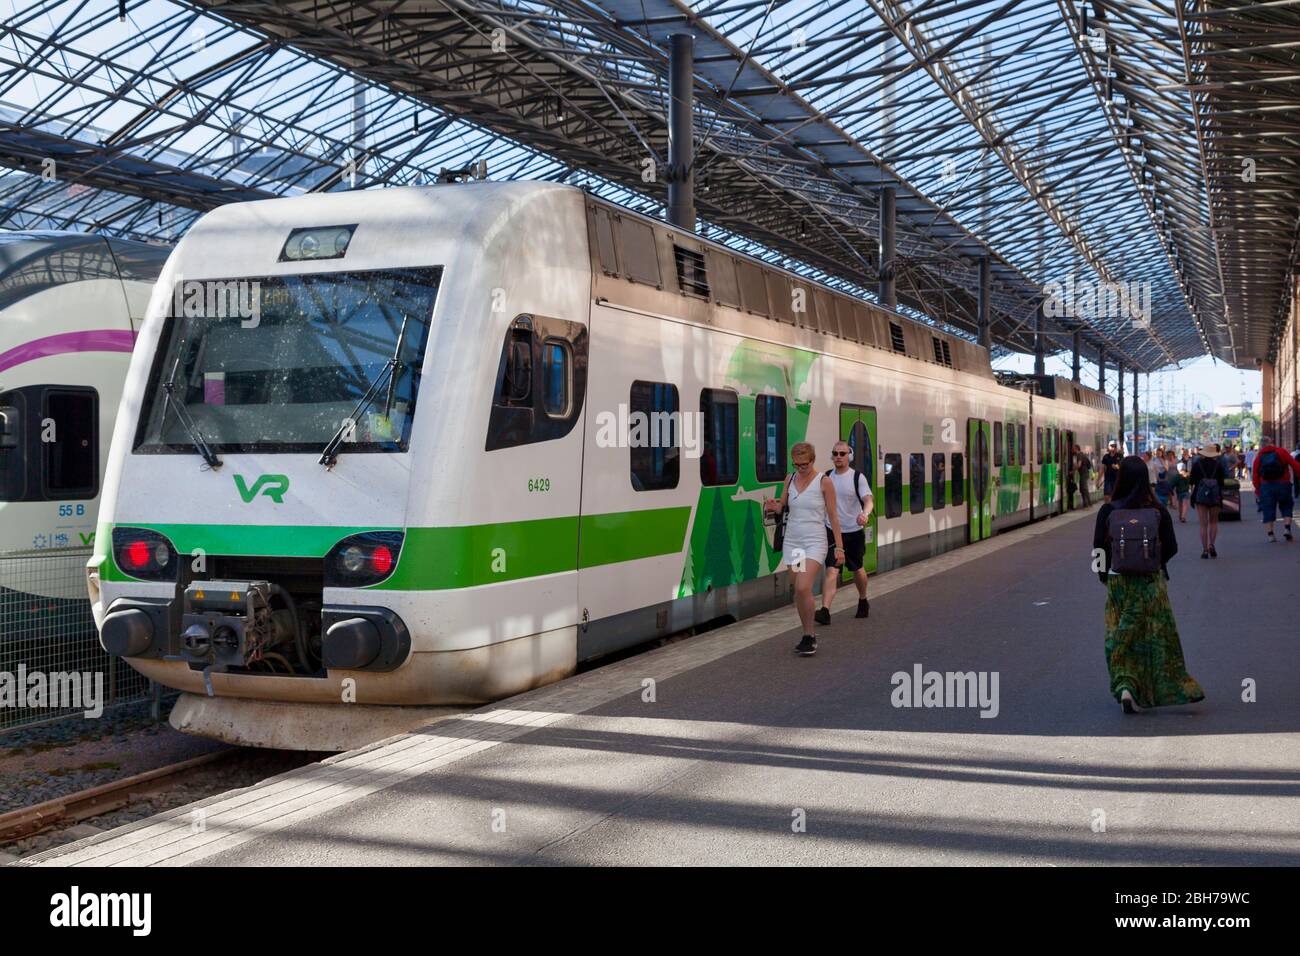 Helsinki, Finland - June 18 2019: A train VR class Sm4 EMU operated by 'VR Group' at Helsinki railway station. Stock Photo